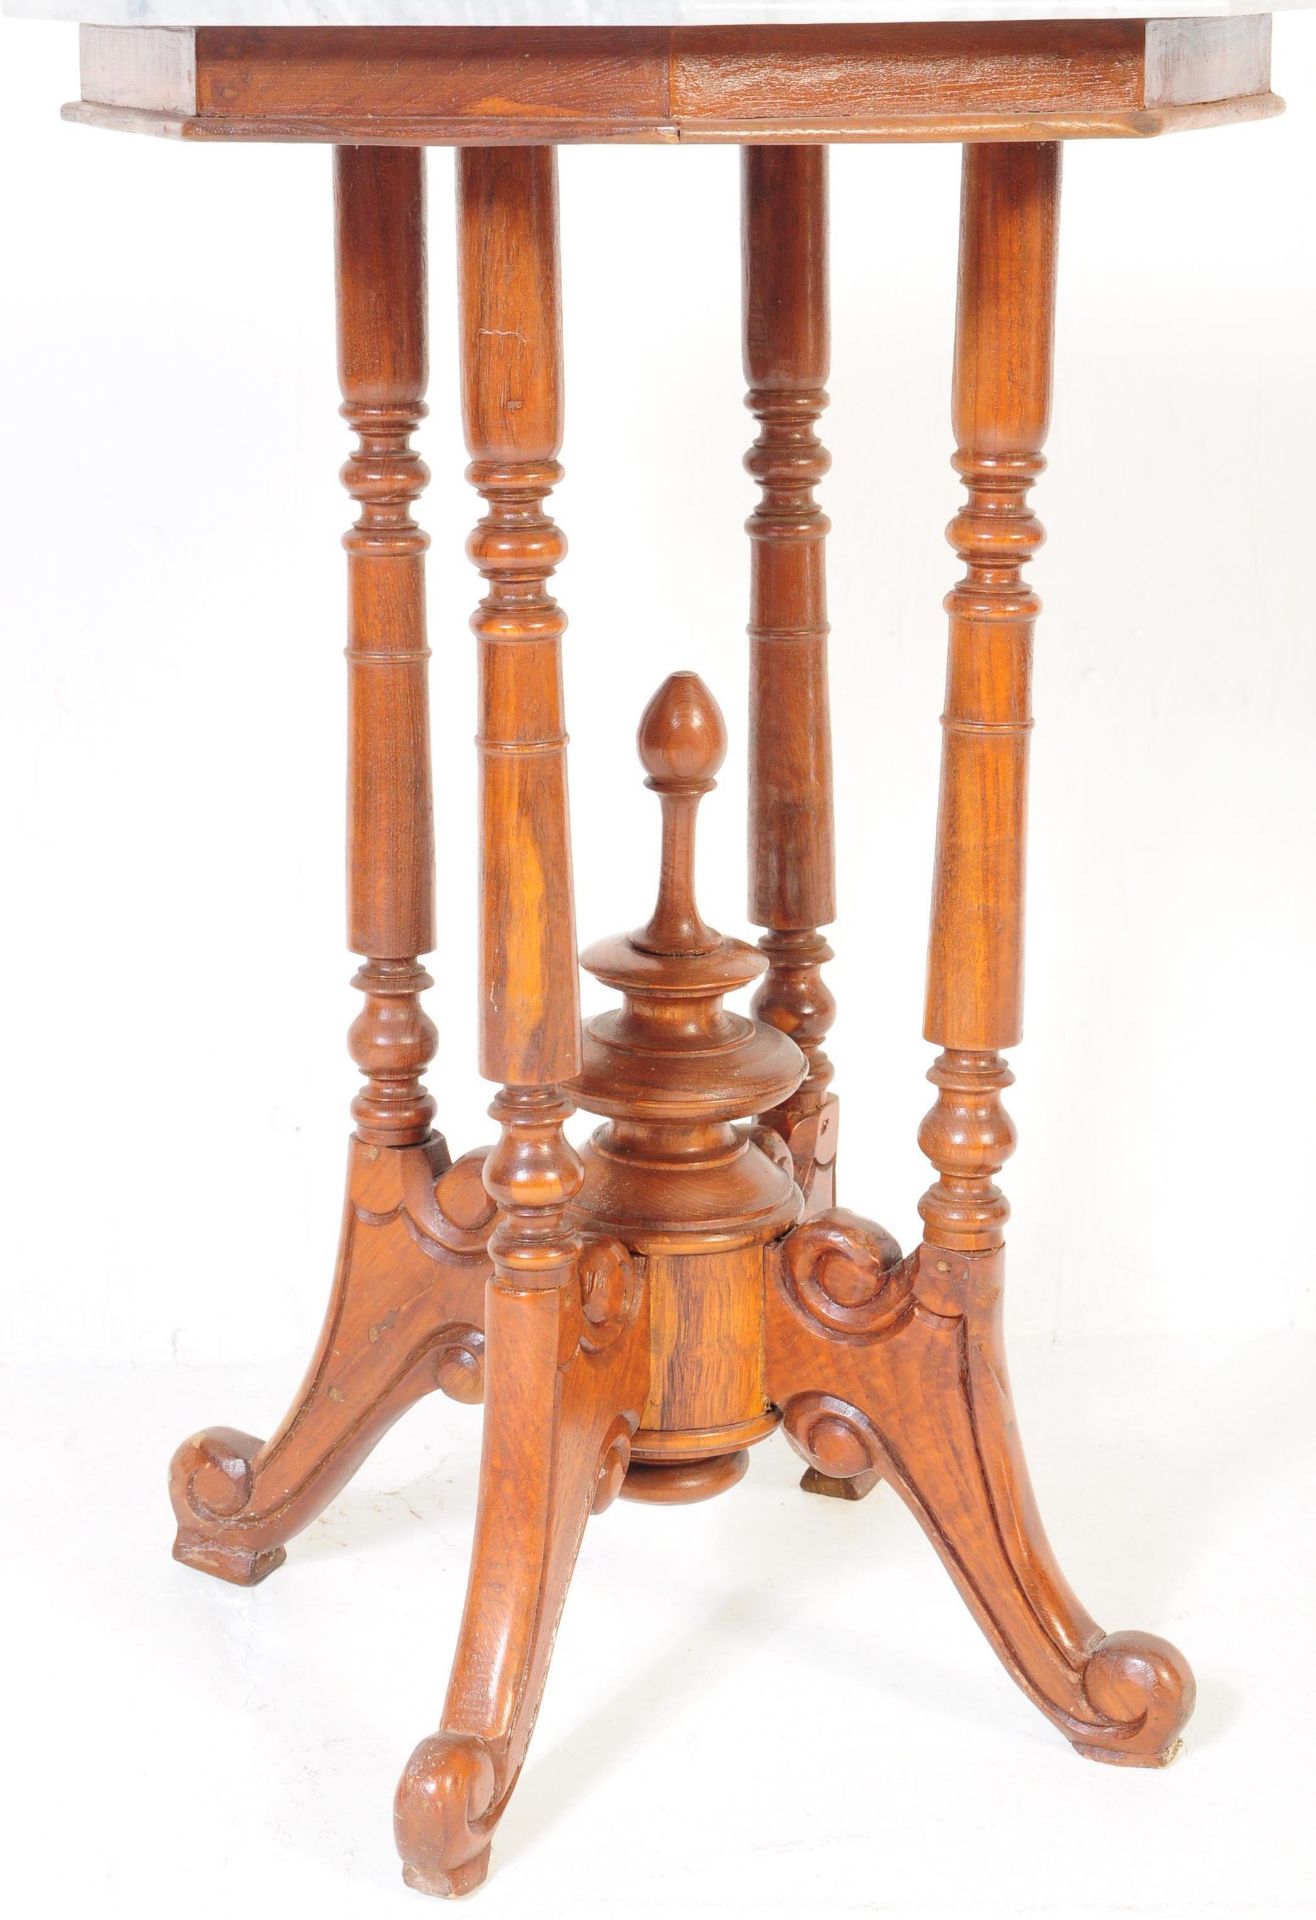 VICTORIAN STYLE MAHOGANY & WHITE VEINED MARBLE TABLE - Image 4 of 4